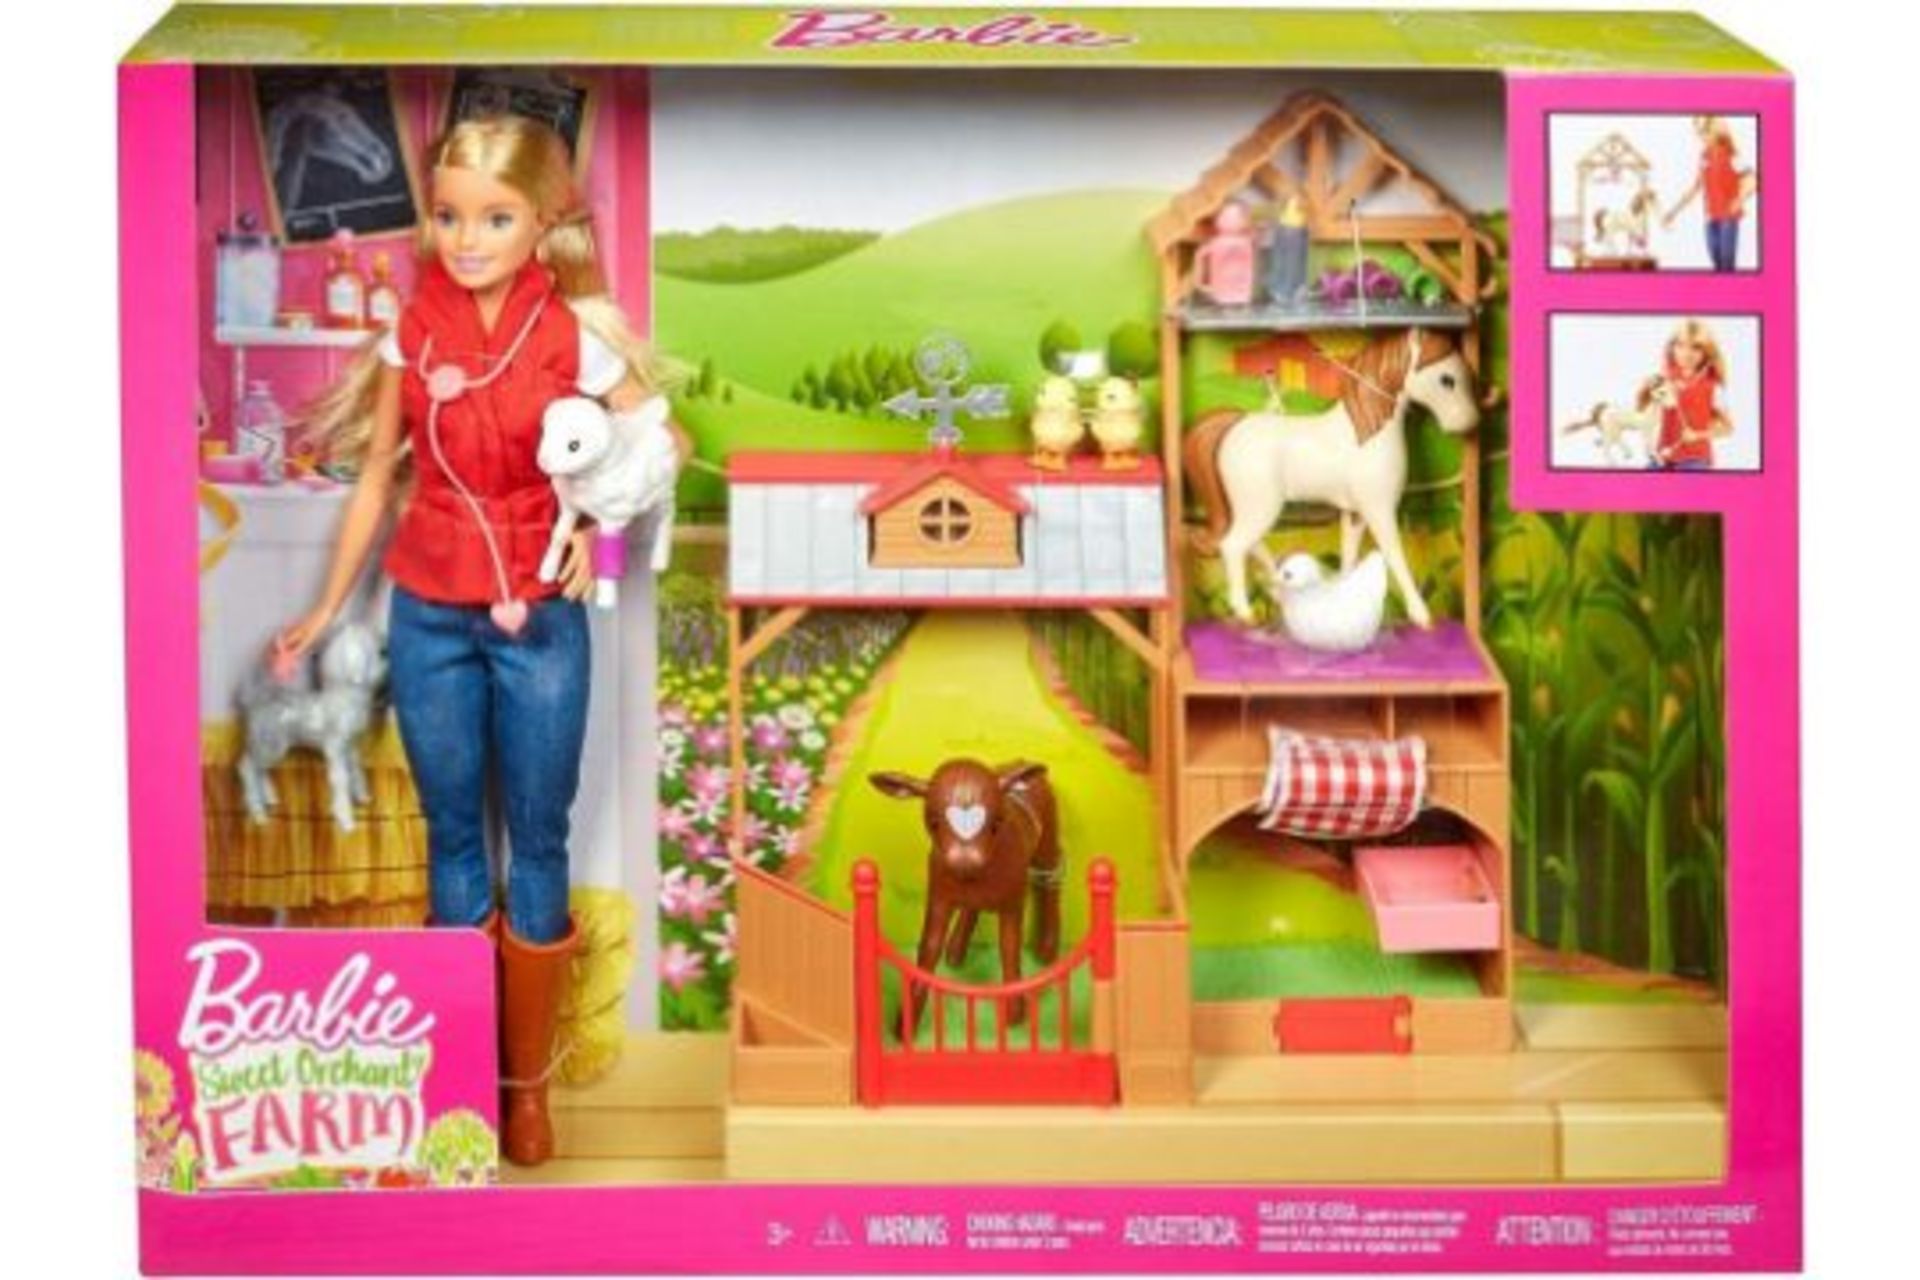 TRADE LOT 5 X BARBIE SWEET ORCHARD FARM PLAYSET WITH BARN AND 10 FARM ANIMALS RRP £149